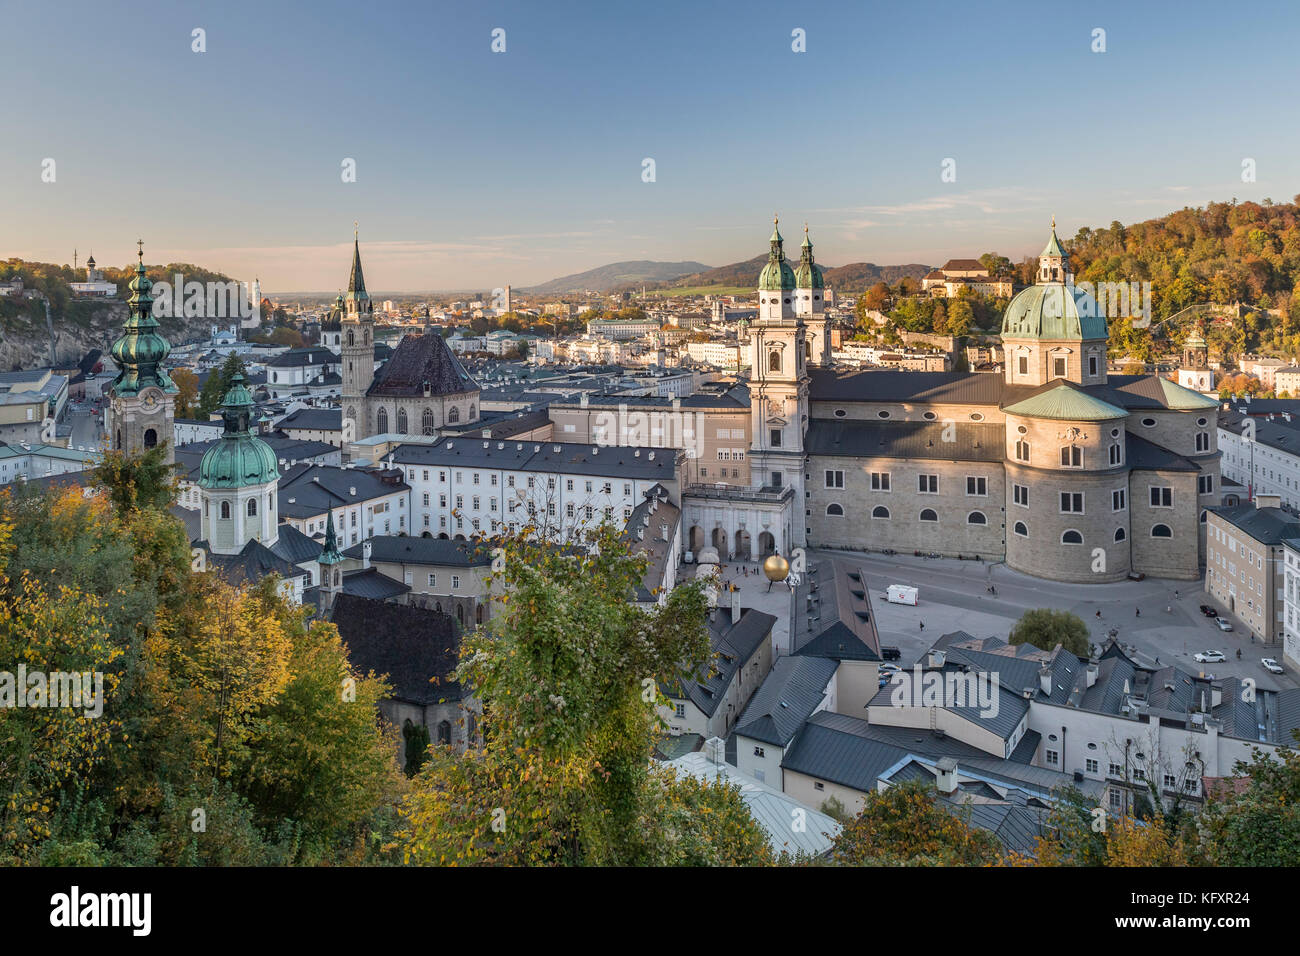 View of Salzburg Cathedral and Old Town, City of Salzburg, Salzburg, Austria Stock Photo